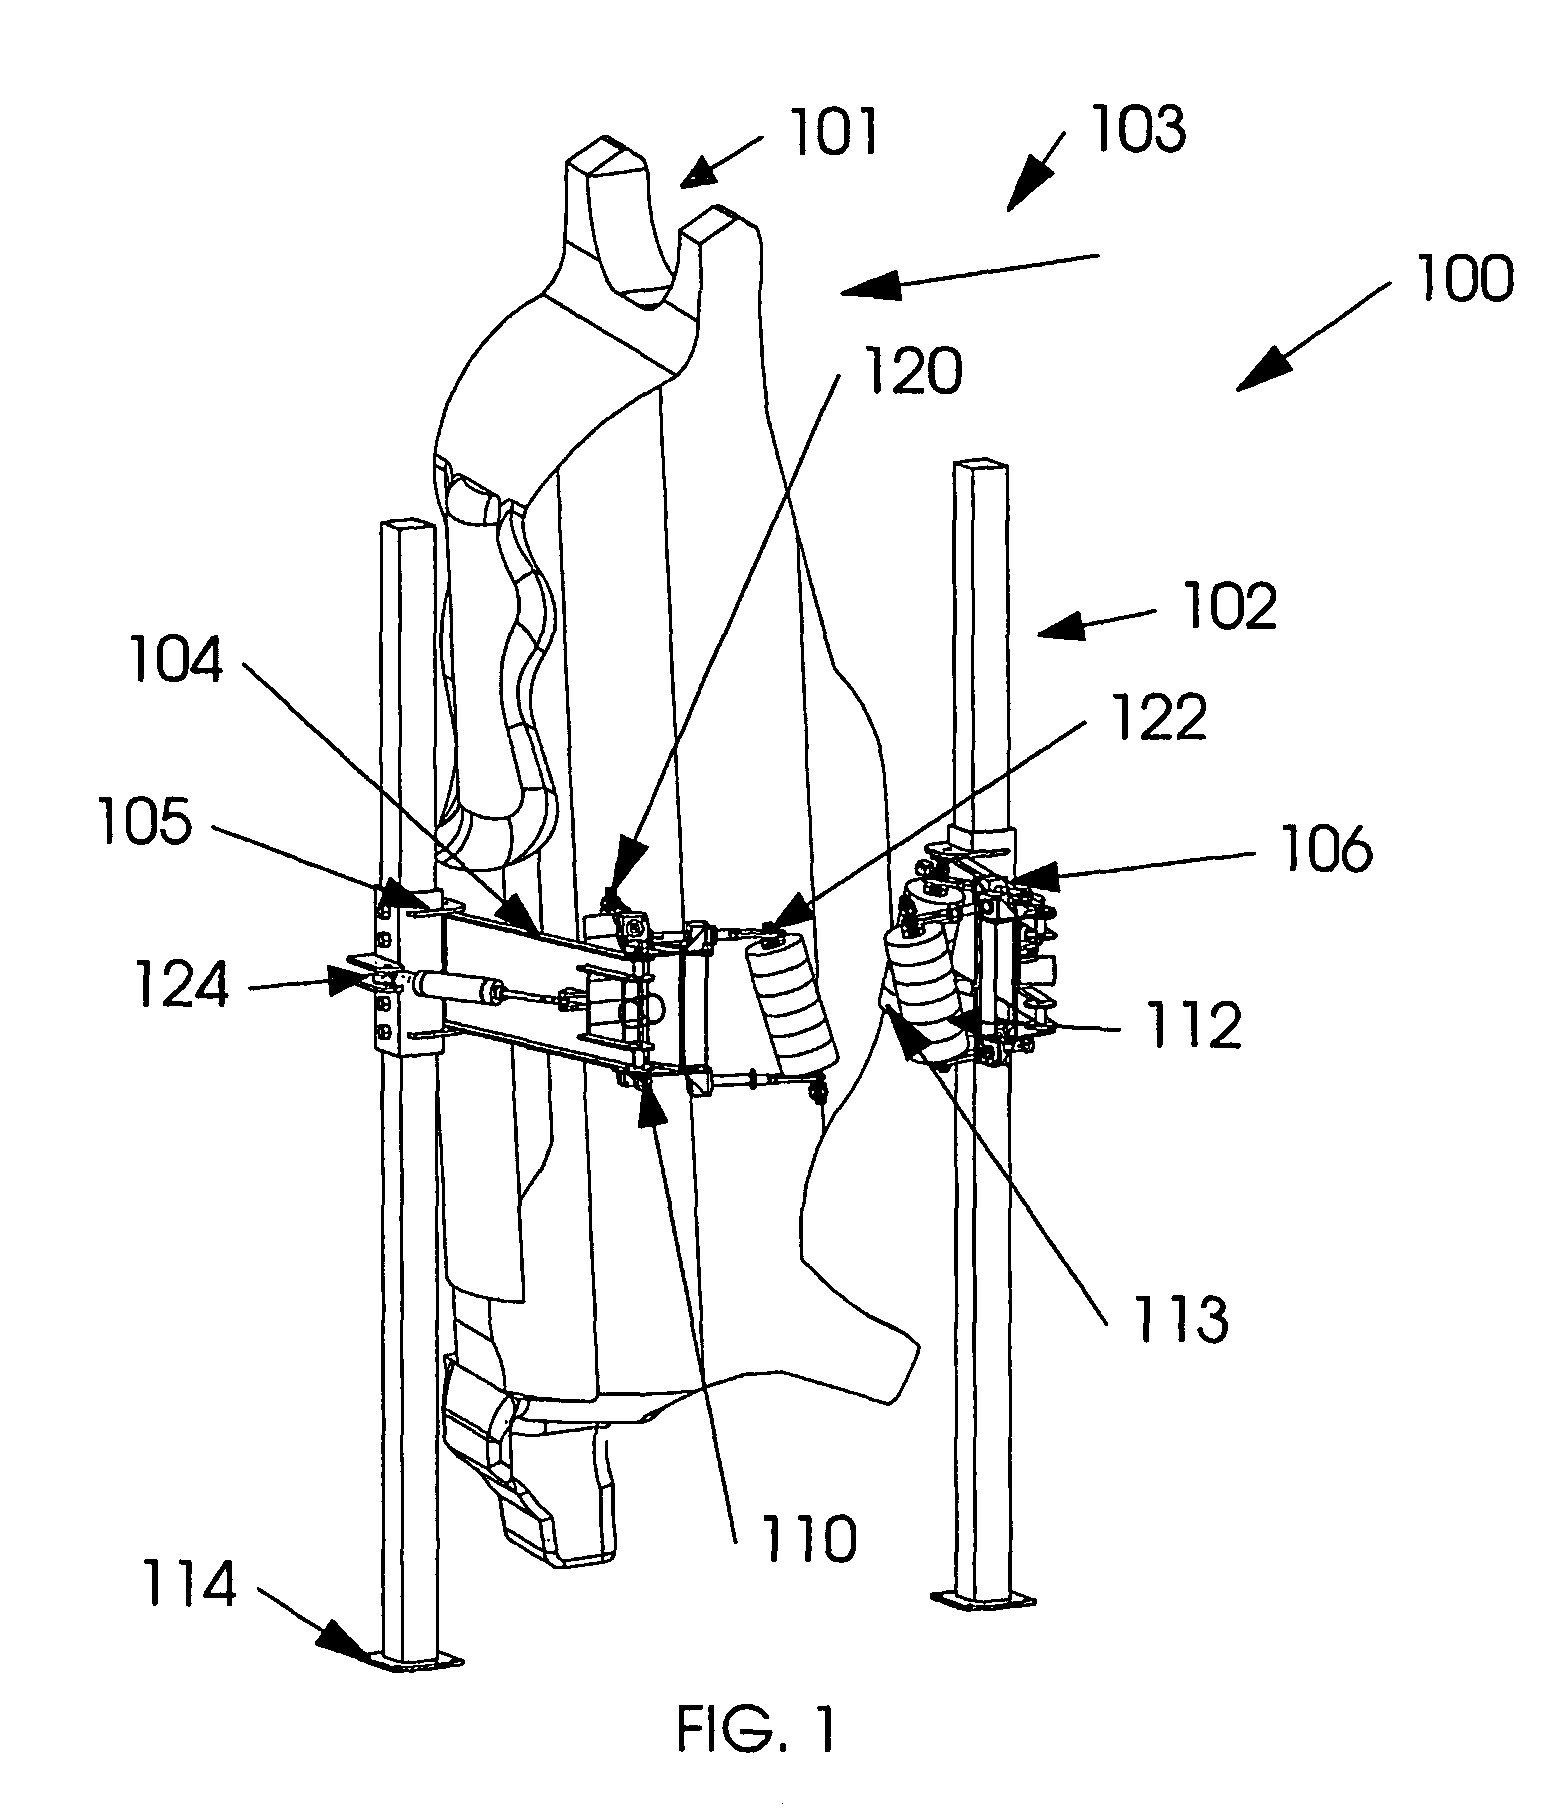 Method and apparatus for removing water from hide of cattle